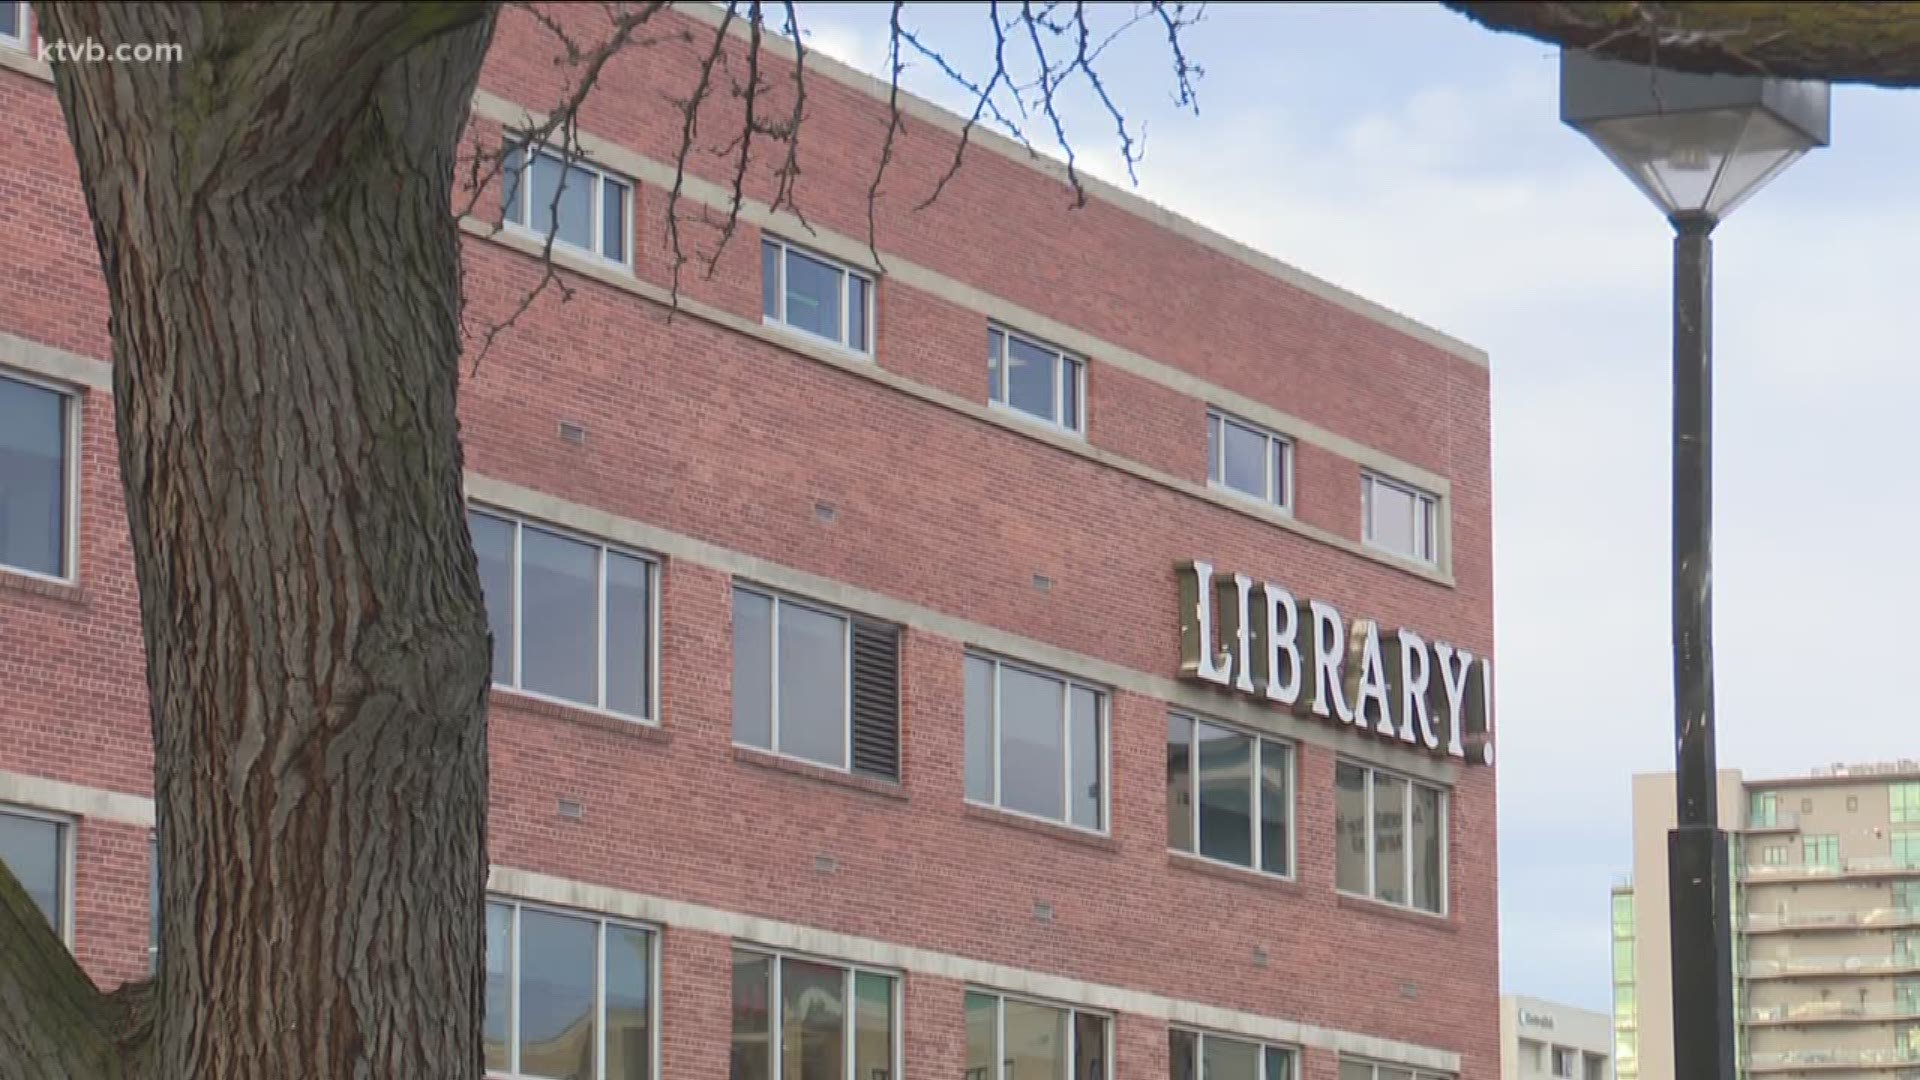 With the new sports stadium and renovated library proposed in Boise, a new group is pushing to get both projects to be on the ballot for a public vote on the grounds that taxpayers' dollars would help fund the projects.